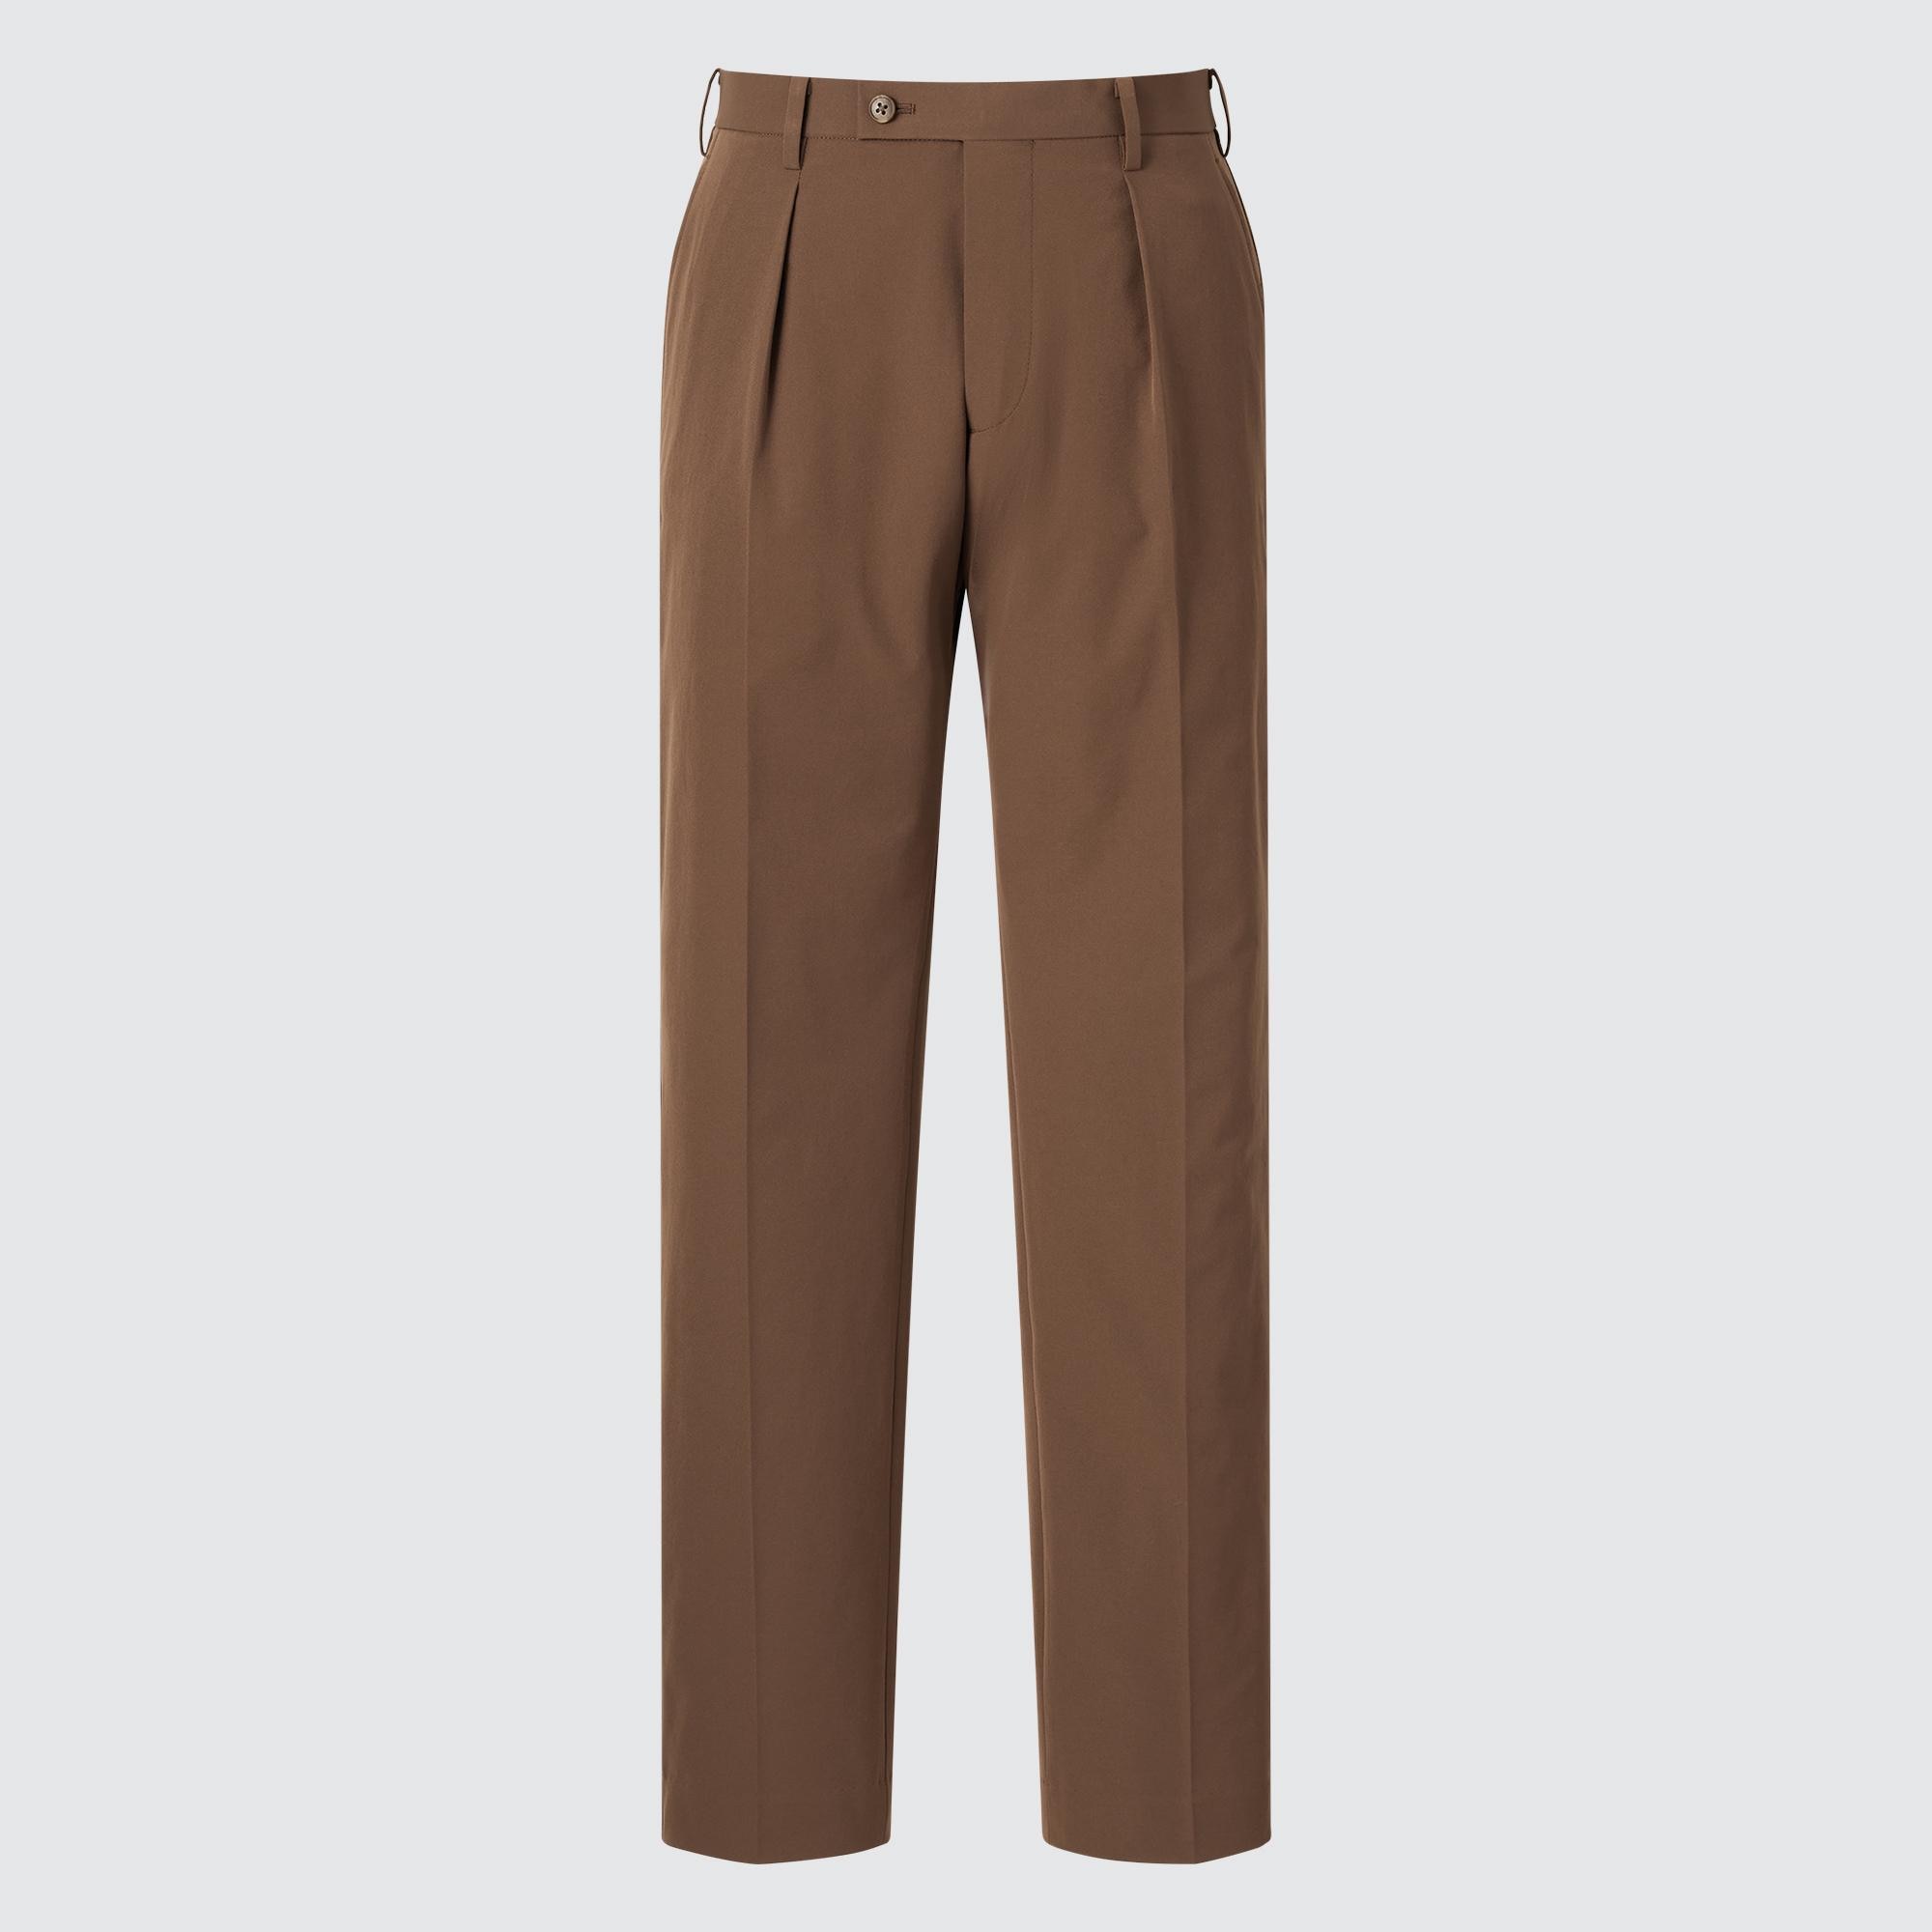 VIRAL PLEATED PANTS every men needs in his closet 🤯👖 SAVE FOR LATER ... |  TikTok